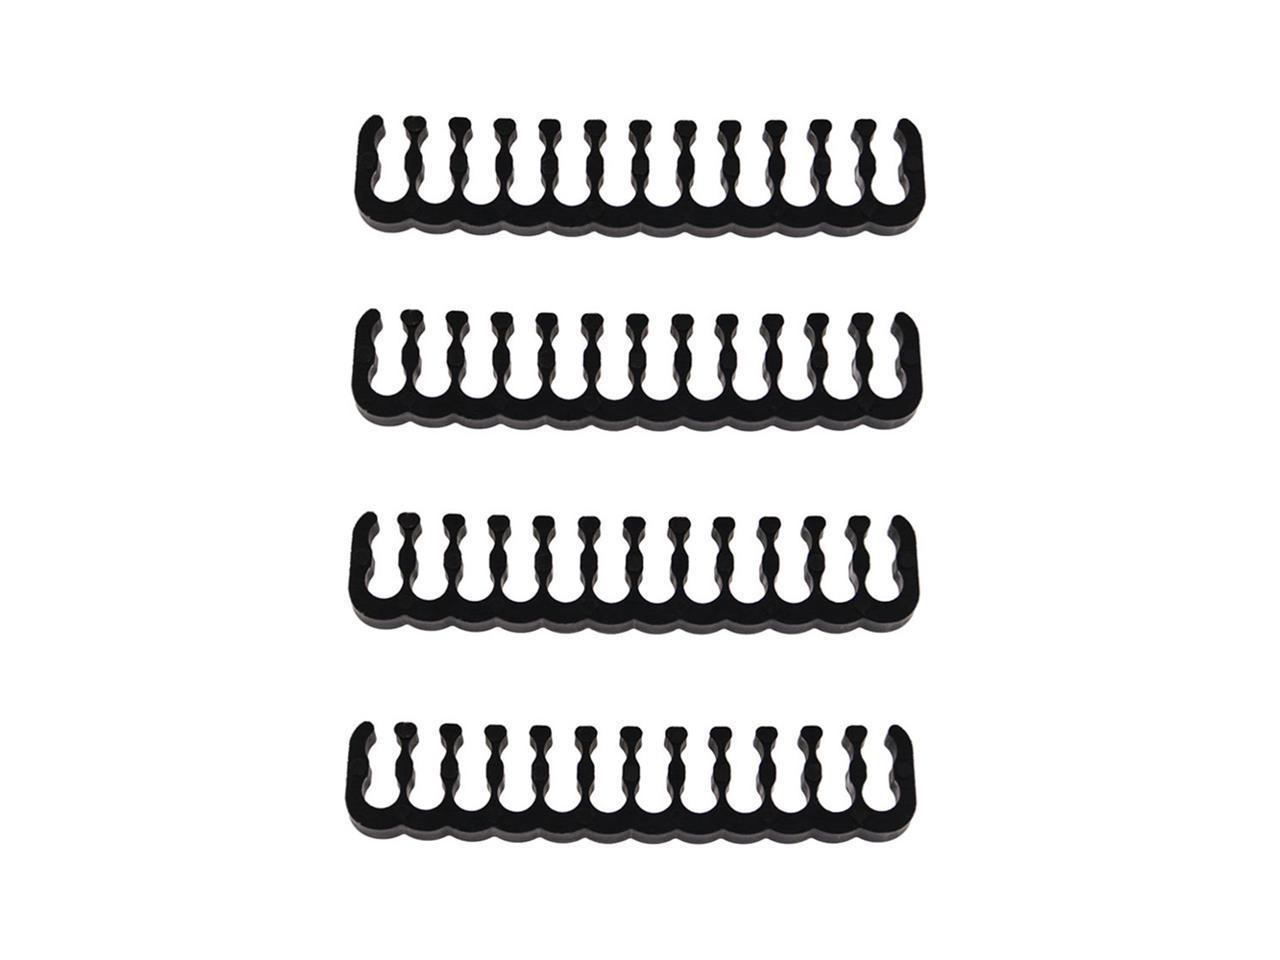 Sleeved-Cable-24-Pieces-Set-Cord-Clamp-4x24-Pin12x8-Pin8x6-Pin-Cable-Comb-for-3mm-Cable-Gesleeved-Up-1925445-6